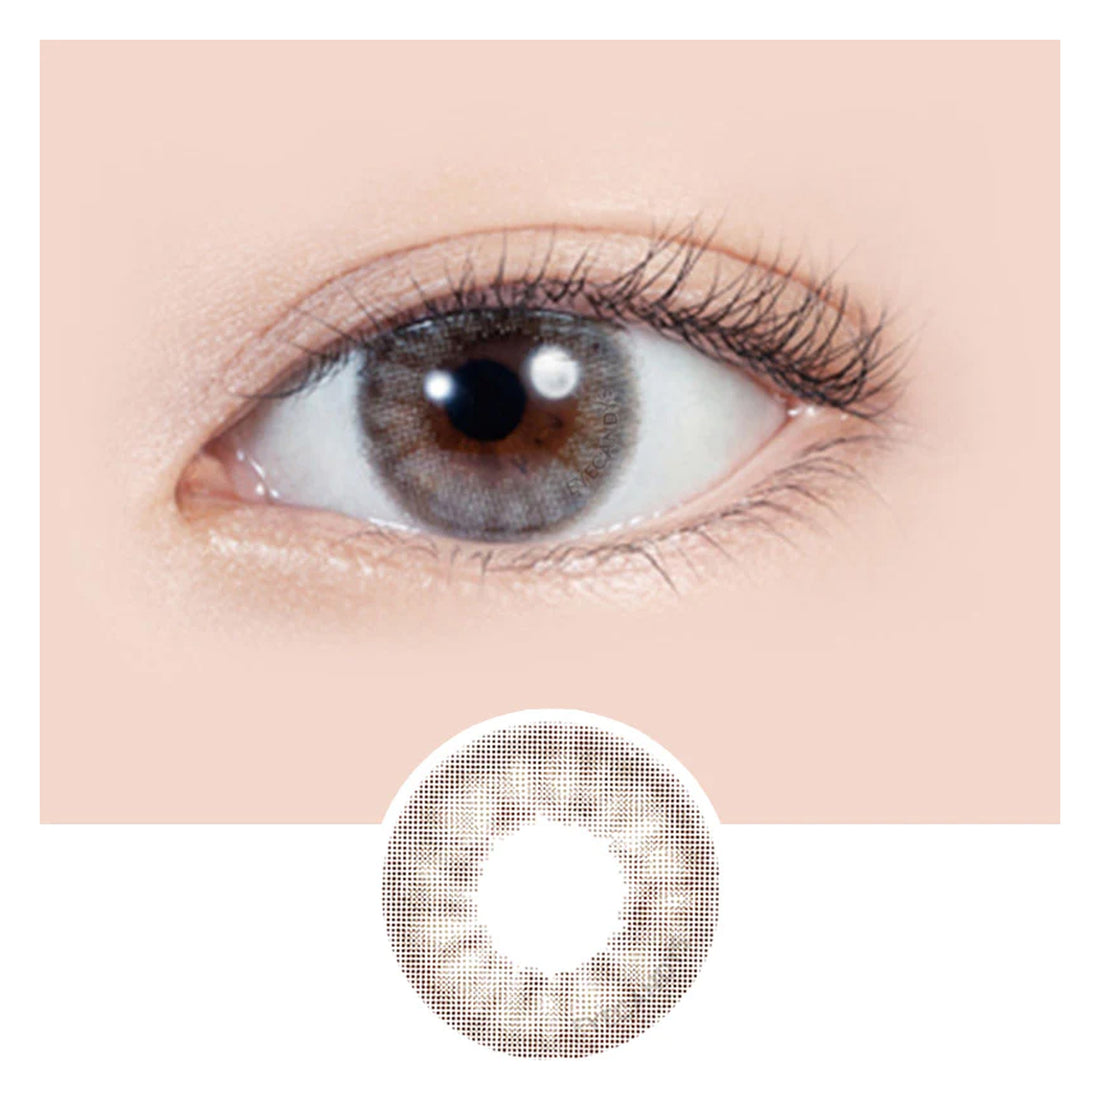 LIL MOON Daily Contact Lenses-Smokey Beige 10lenses